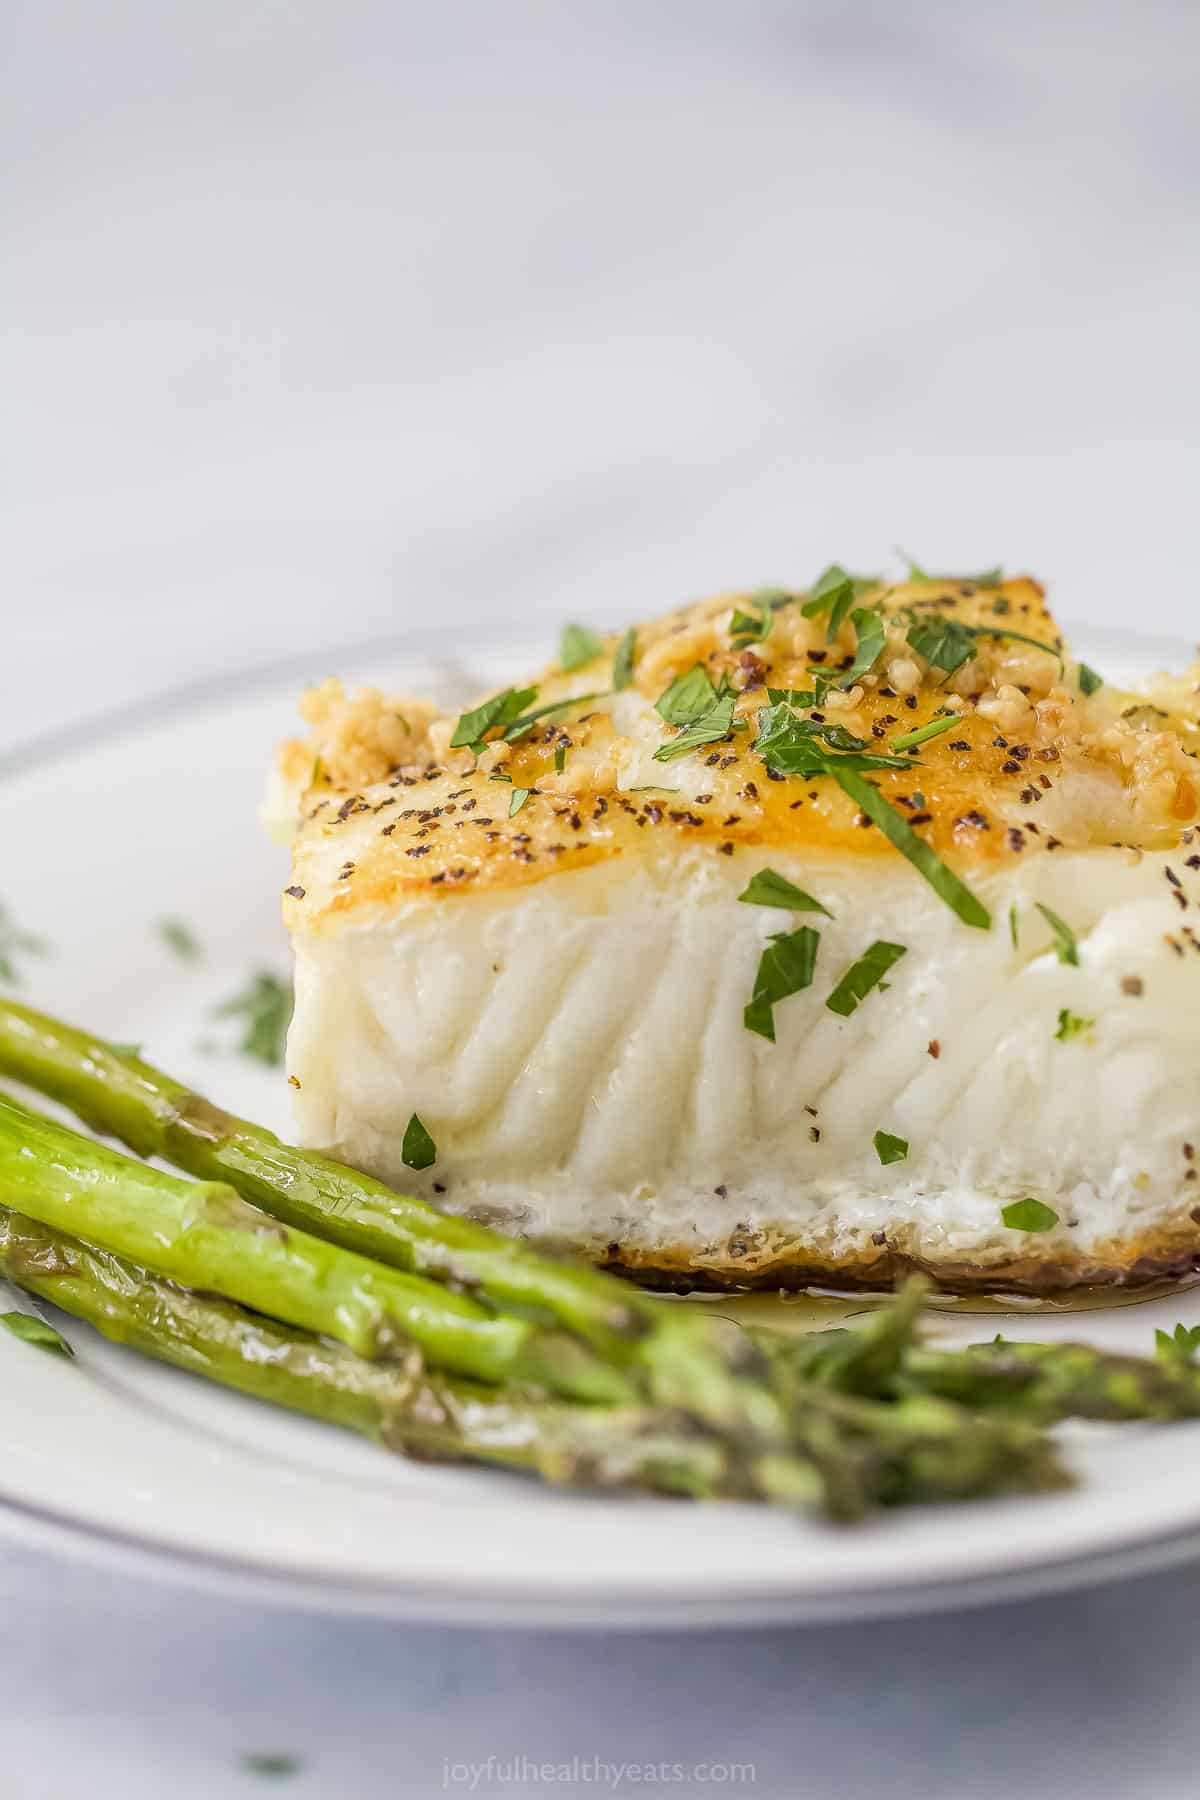 Seared sea bass with asparagus on the side